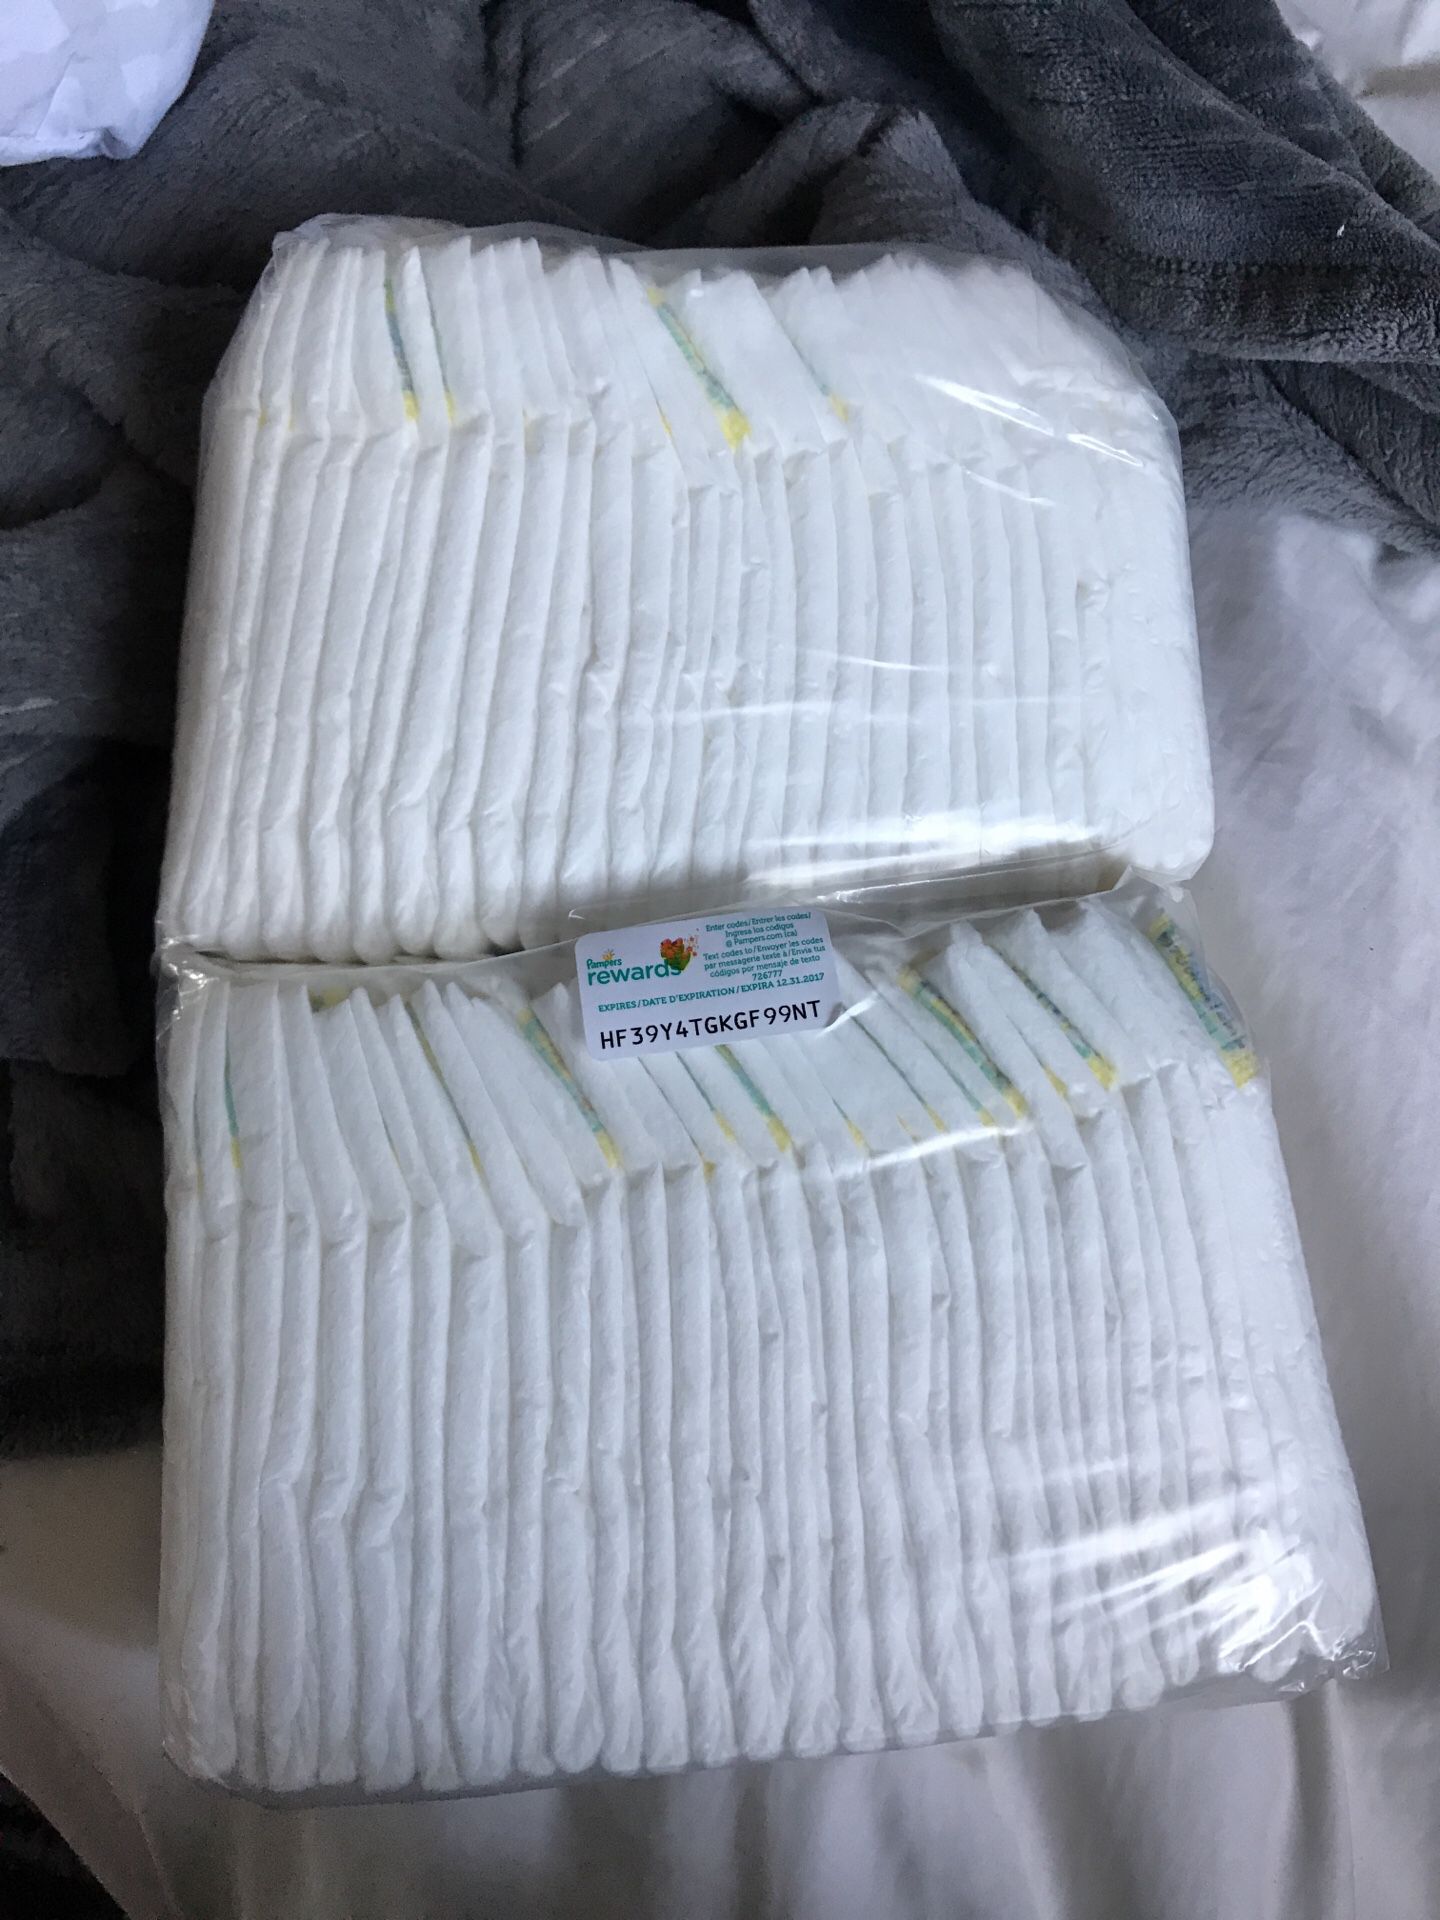 New born pampers